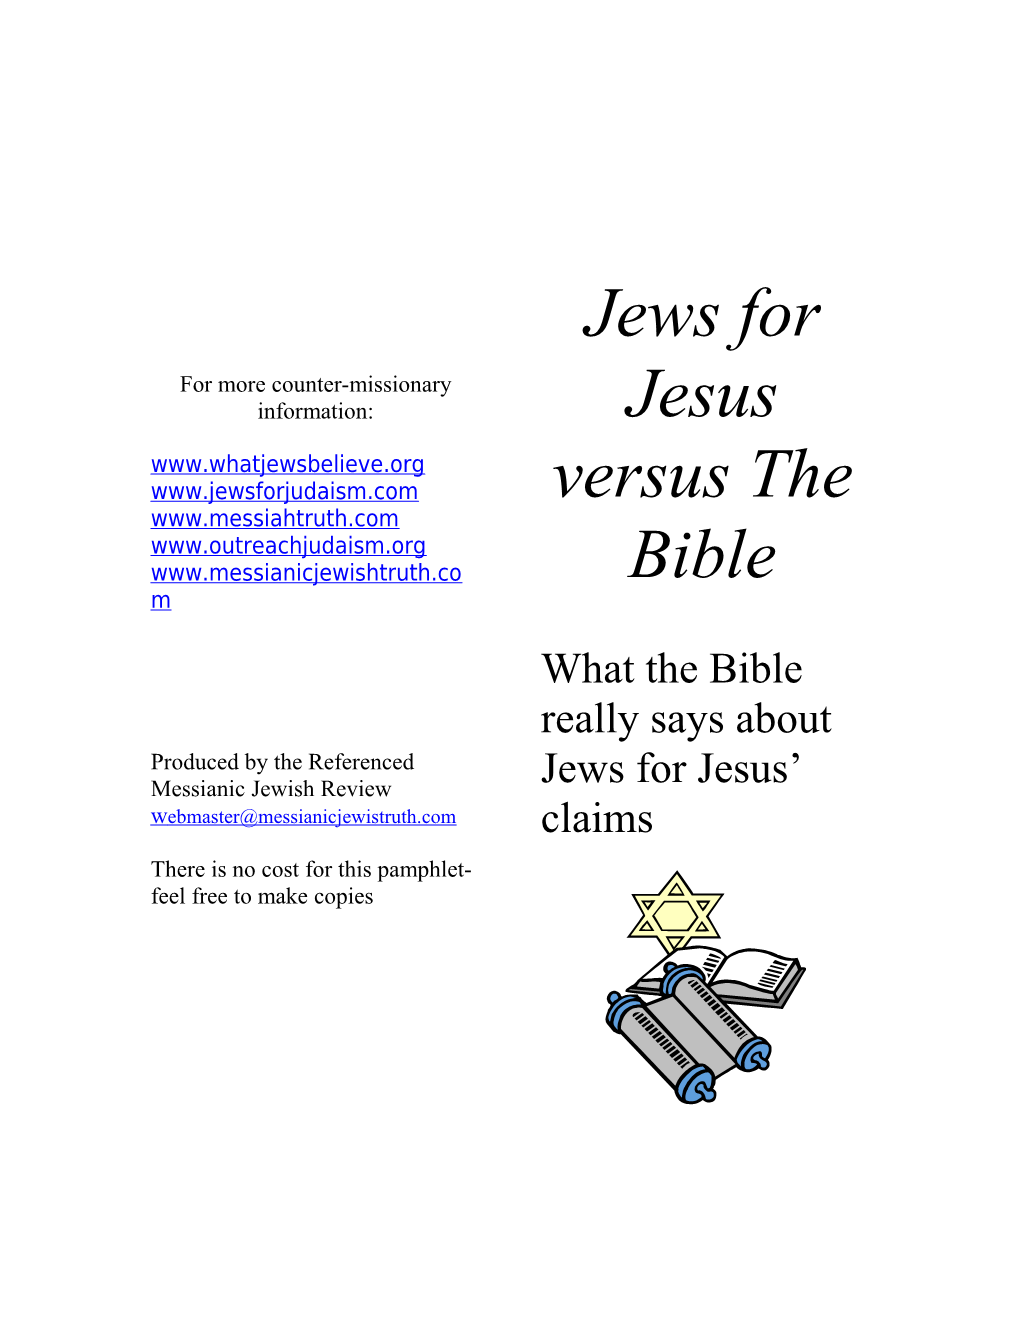 From the Lips of Jews for Jesus